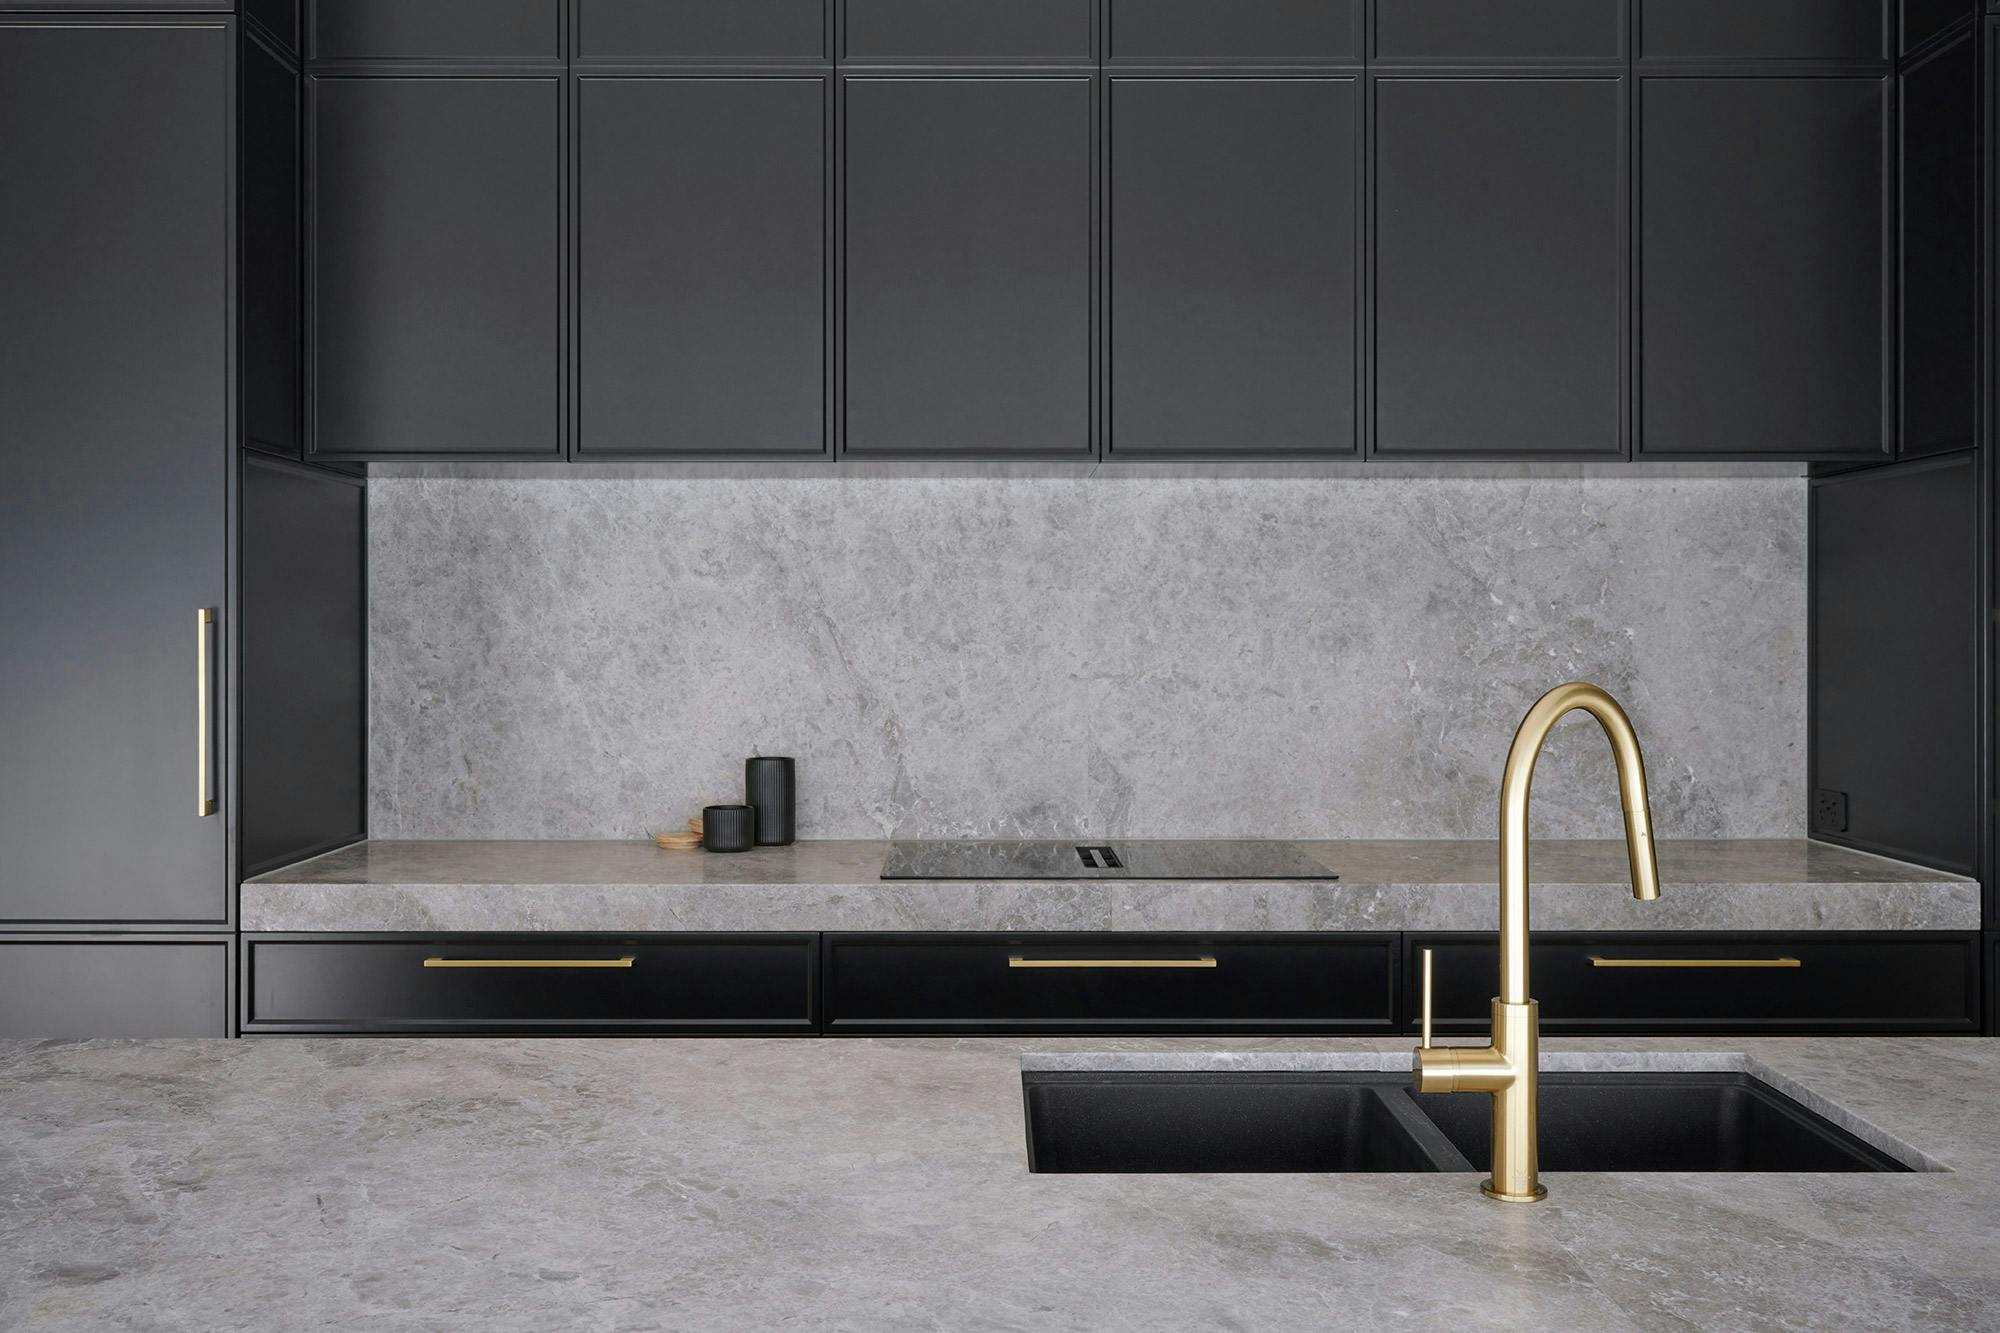 Imagem número 35 da actual secção de The sophisticated and exclusive Scalea Equinox stone is a real eye-catcher in this opulent kitchen with dramatic tones da Cosentino Portugal